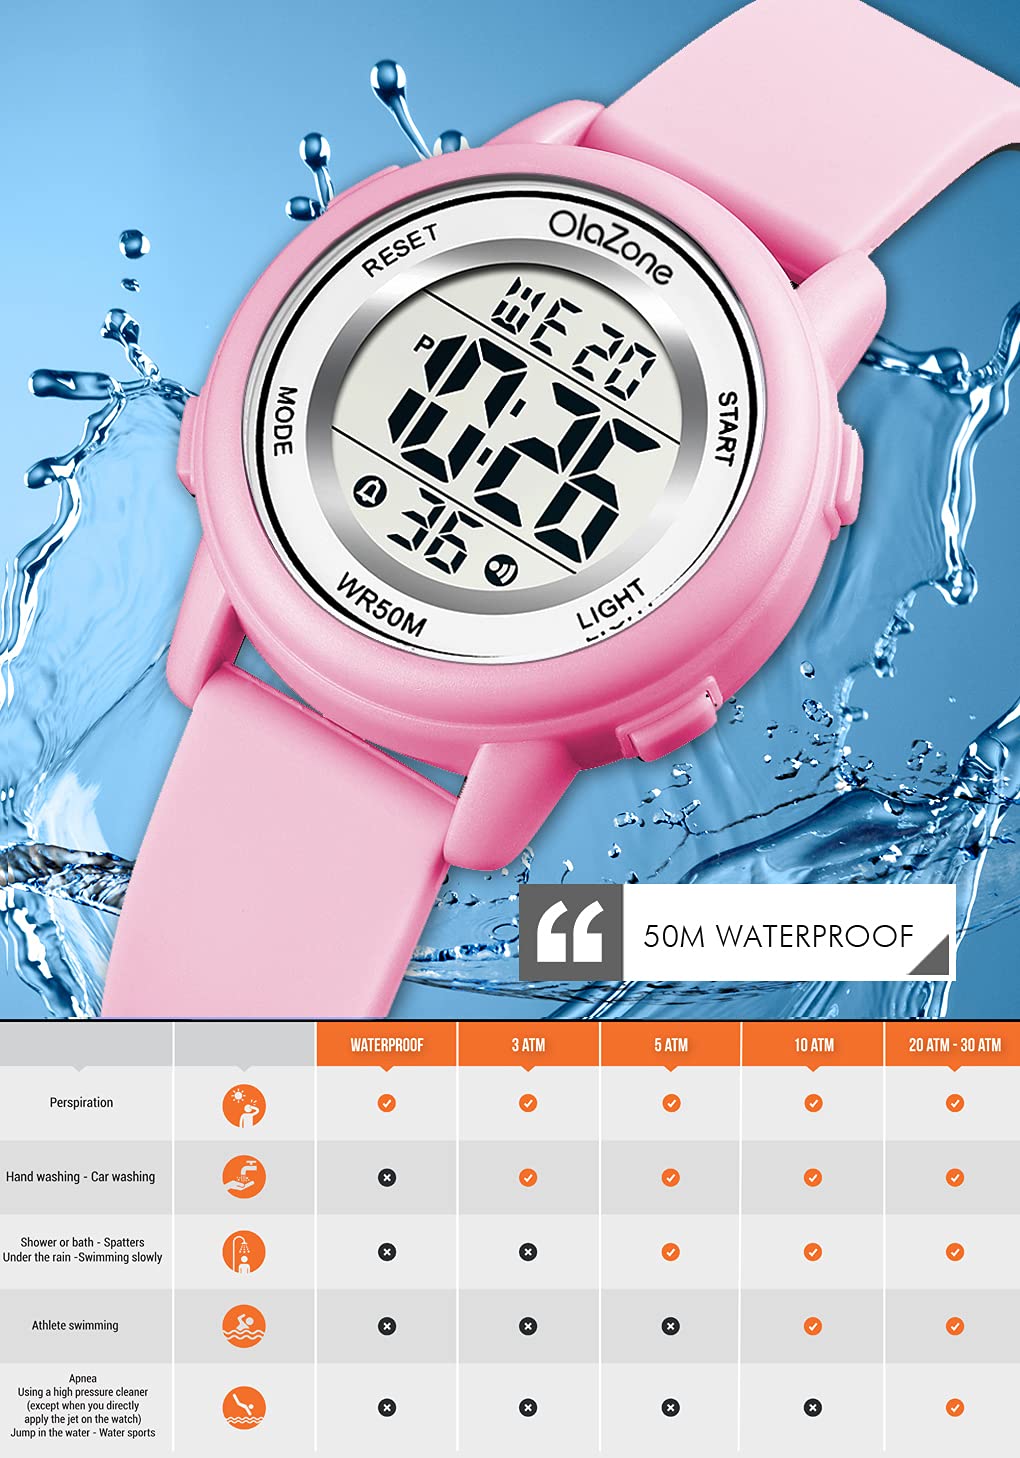 OLAZONE Girls Digital Watch Kids 7-Color Flashing Light Water Resistant 164FT Alarm for Age 5-12 Pink